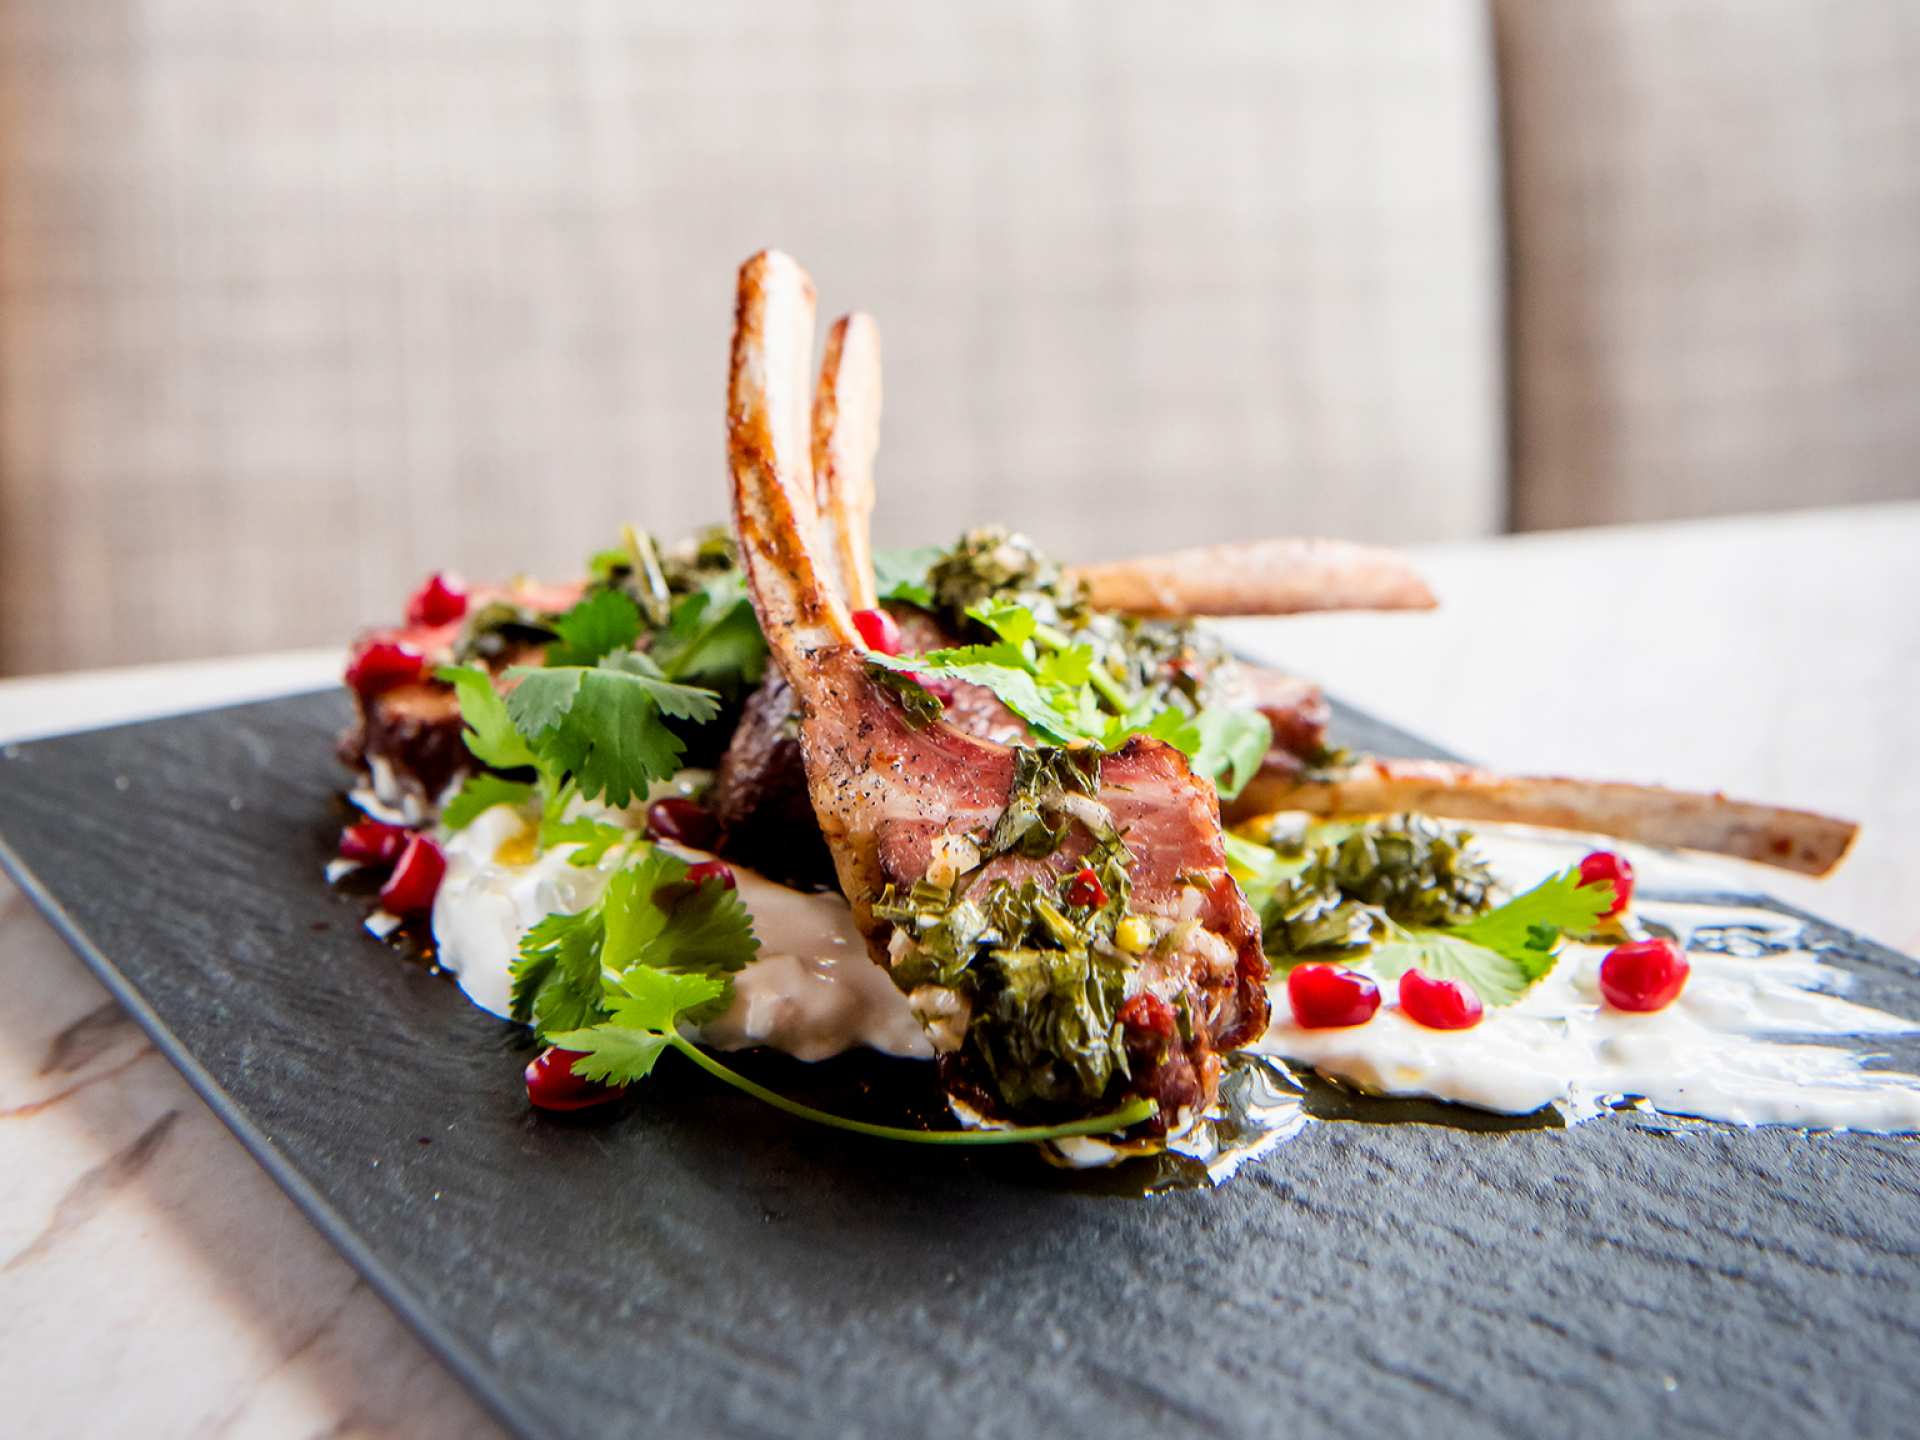 Things to do in Toronto | Grilled lamb chops at 1 Hotel Toronto